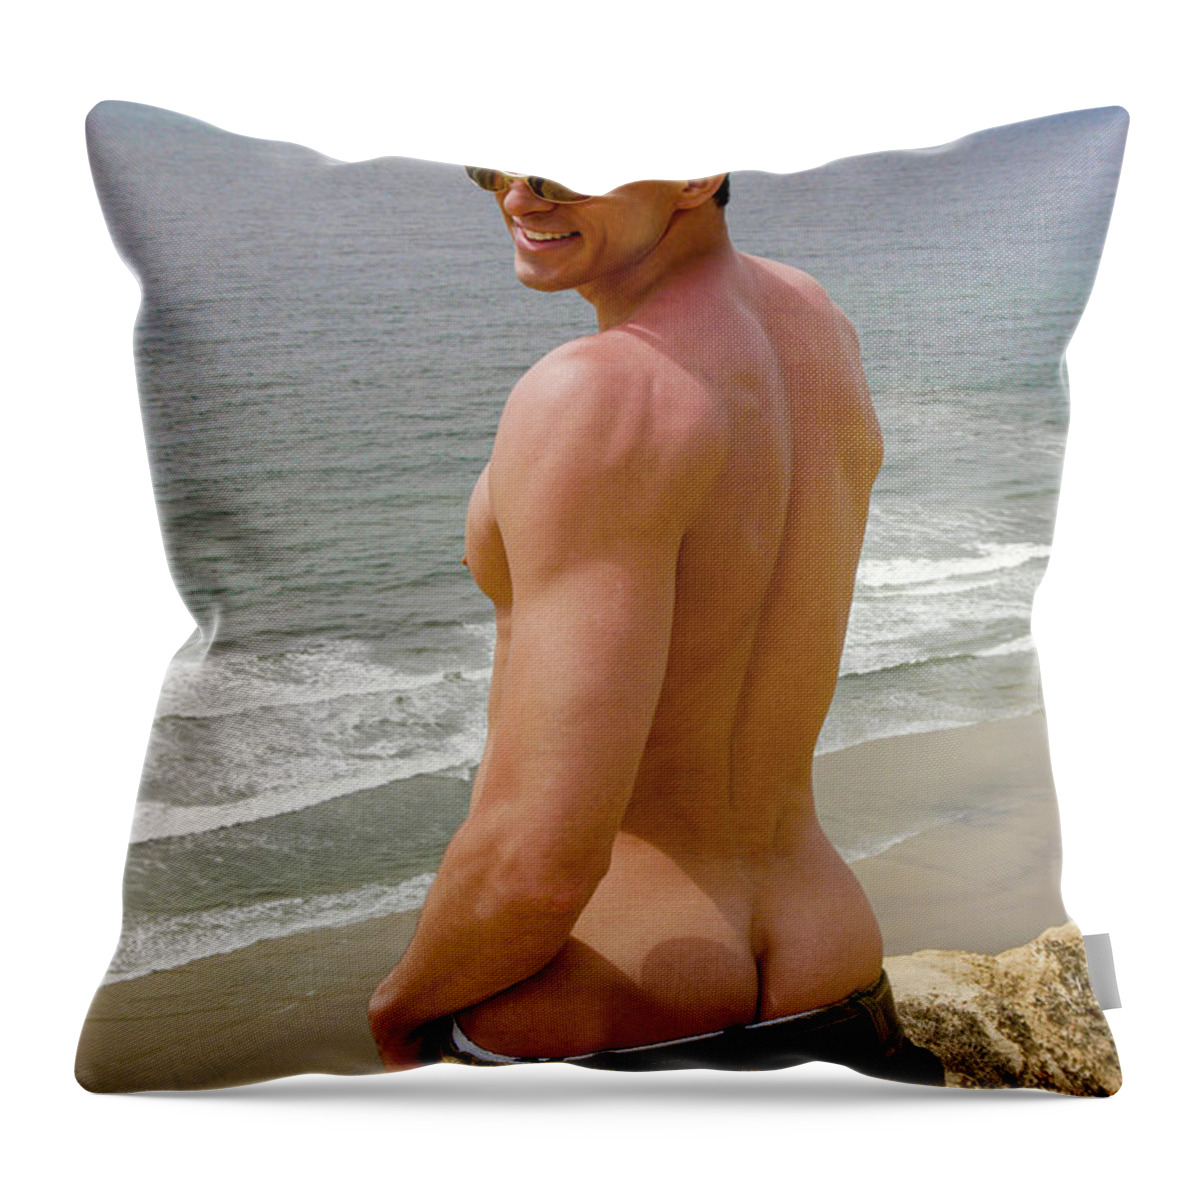 Young Throw Pillow featuring the photograph Scenic View of nature and an almost nude handsome man. by Gunther Allen